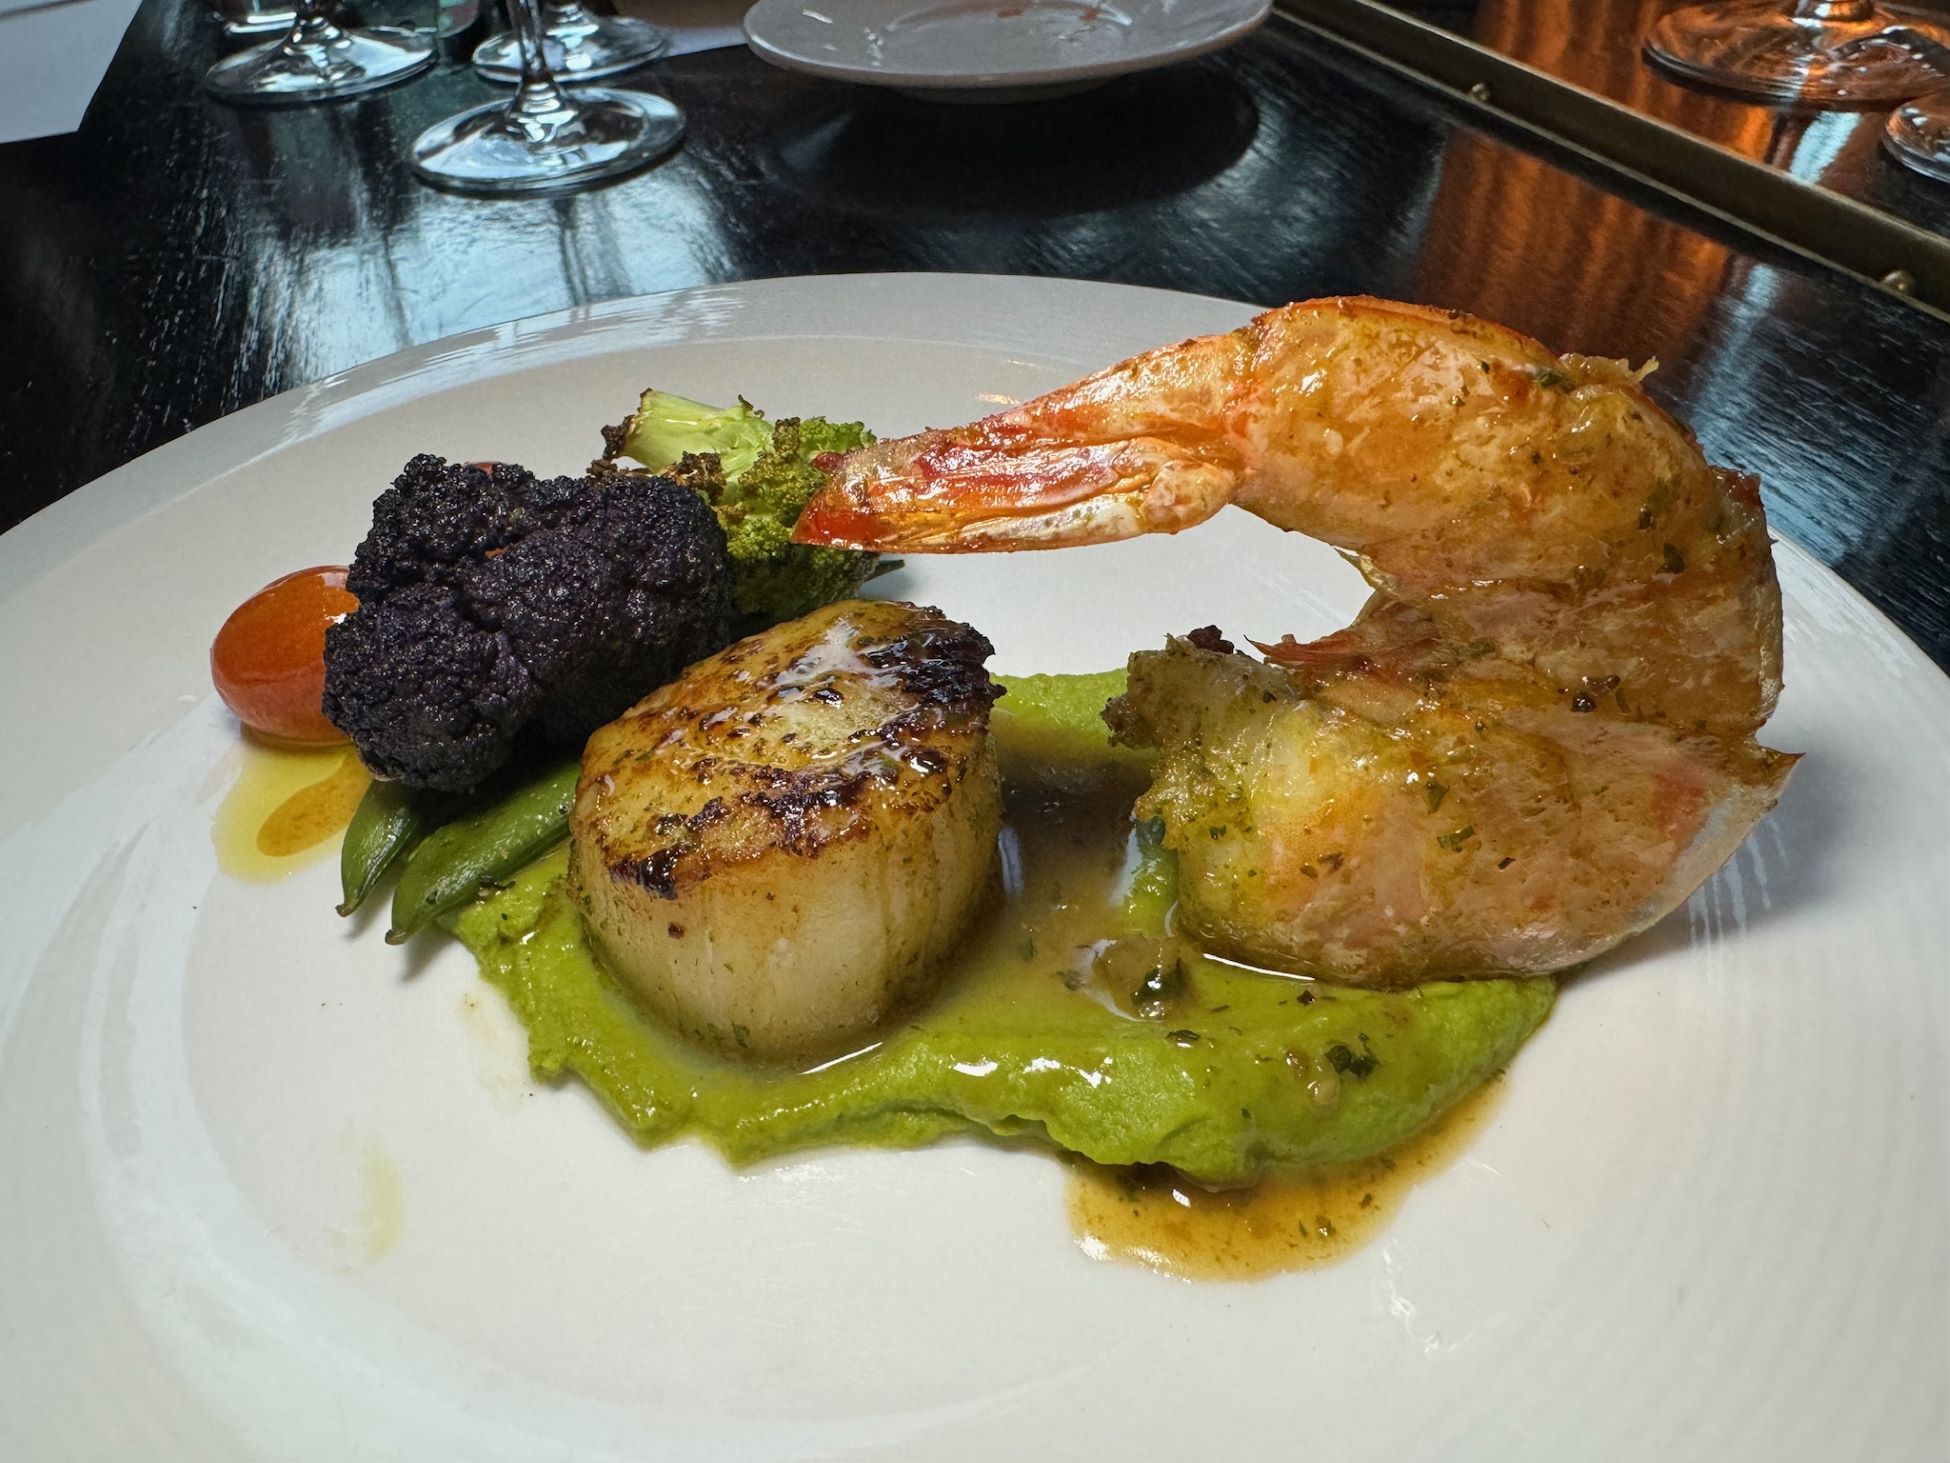 An image of the Roasted Gambas and Scallop.